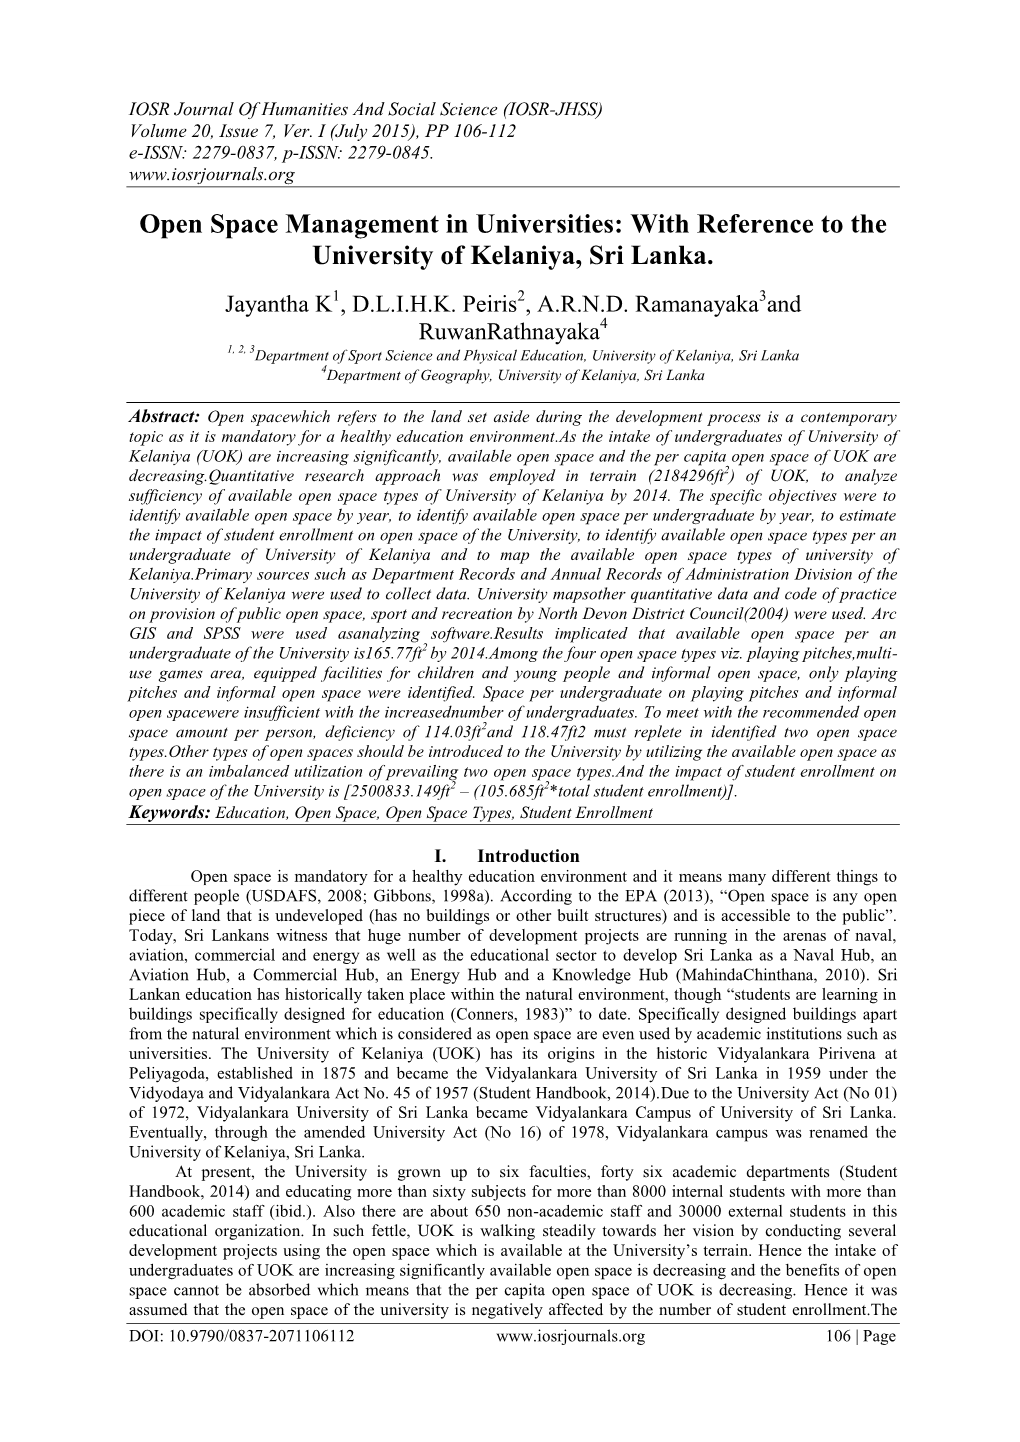 Open Space Management in Universities: with Reference to the University of Kelaniya, Sri Lanka